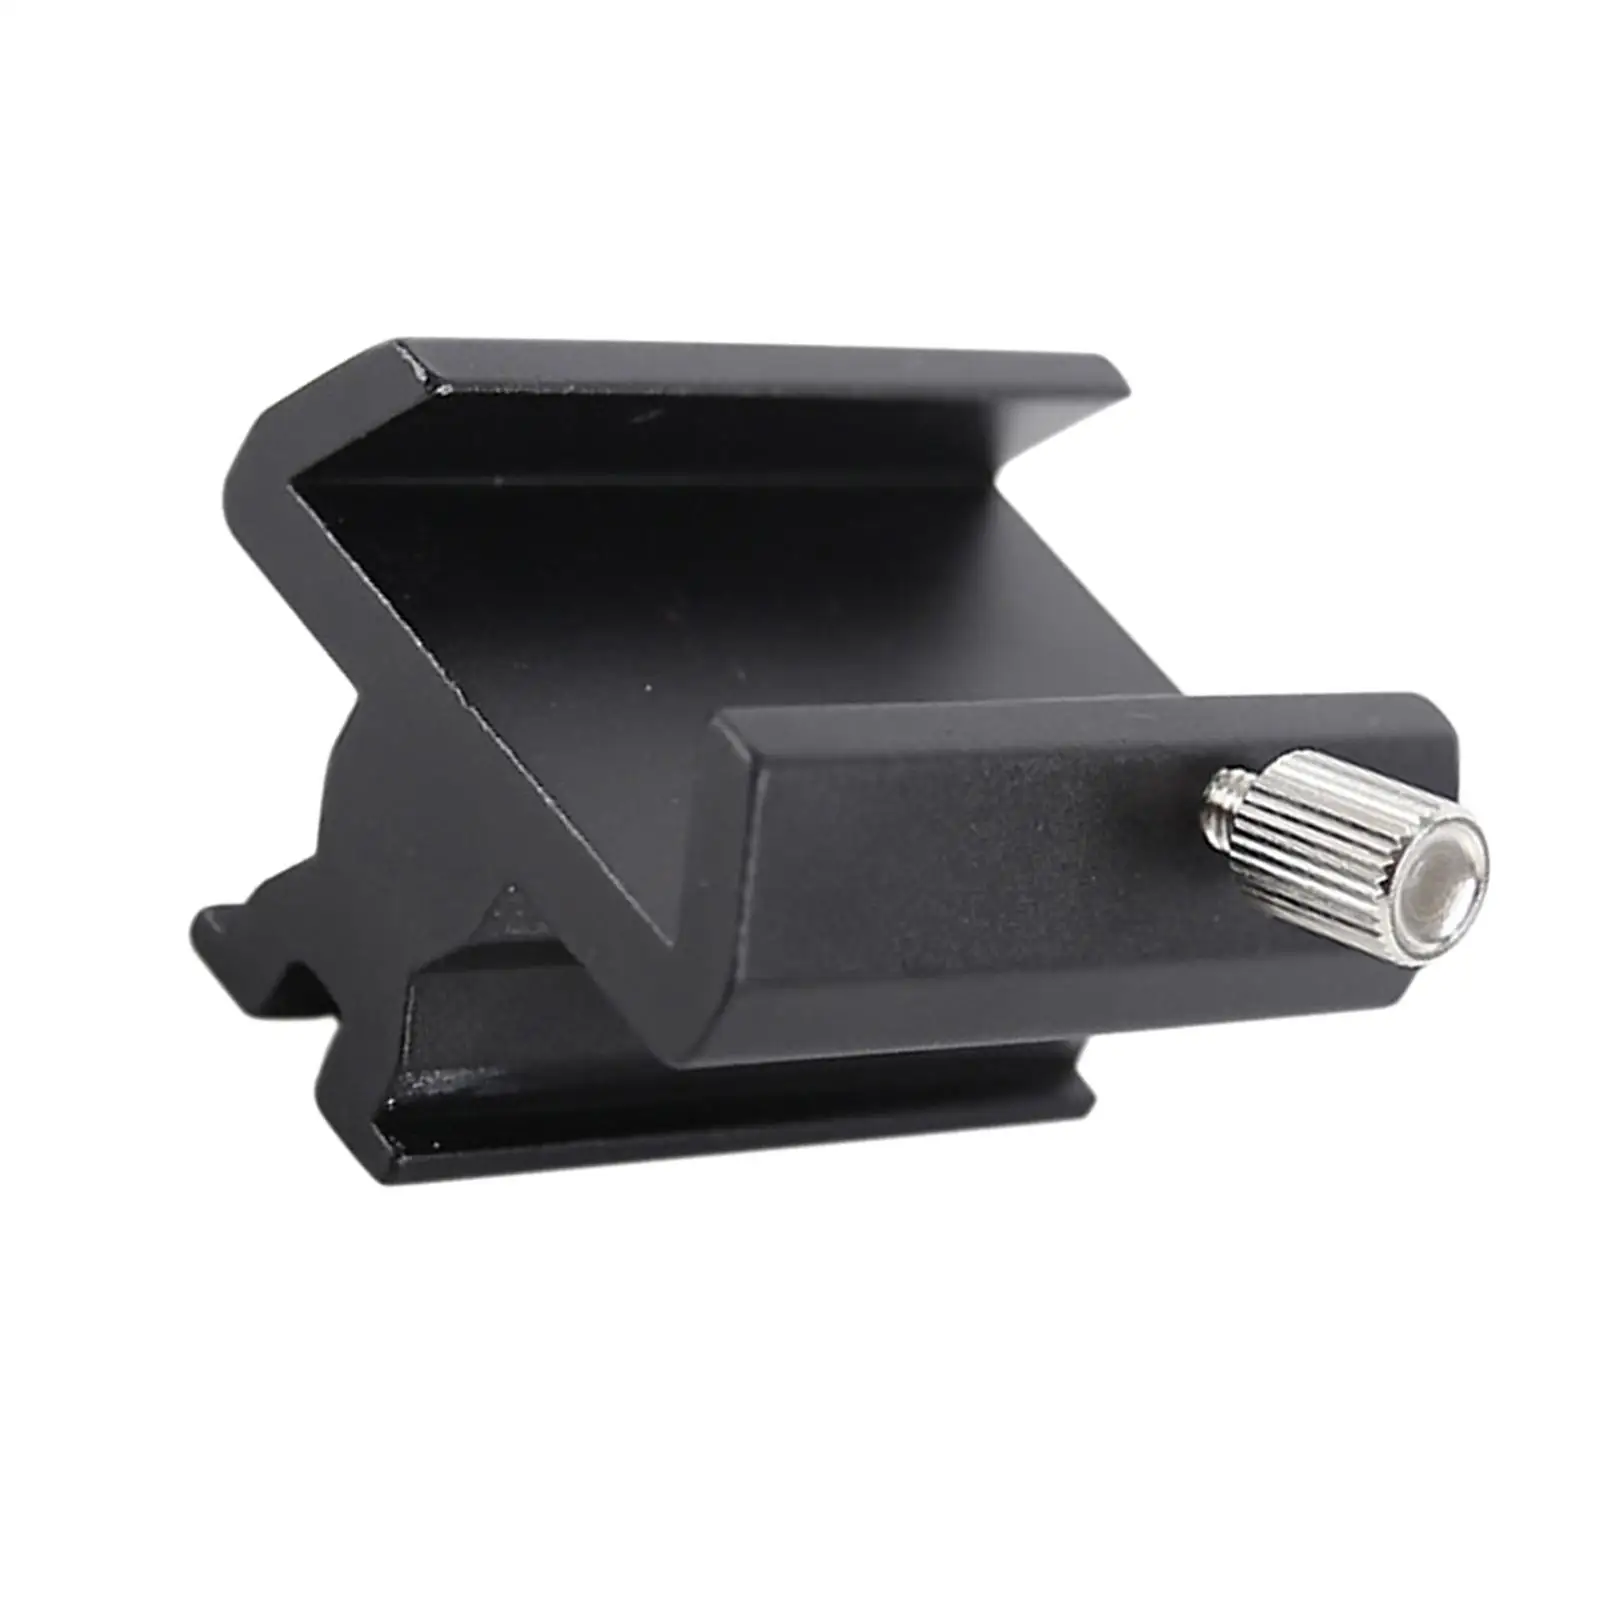 Dovetail Base for Finder Scope Metal Convenient Installation Dovetail